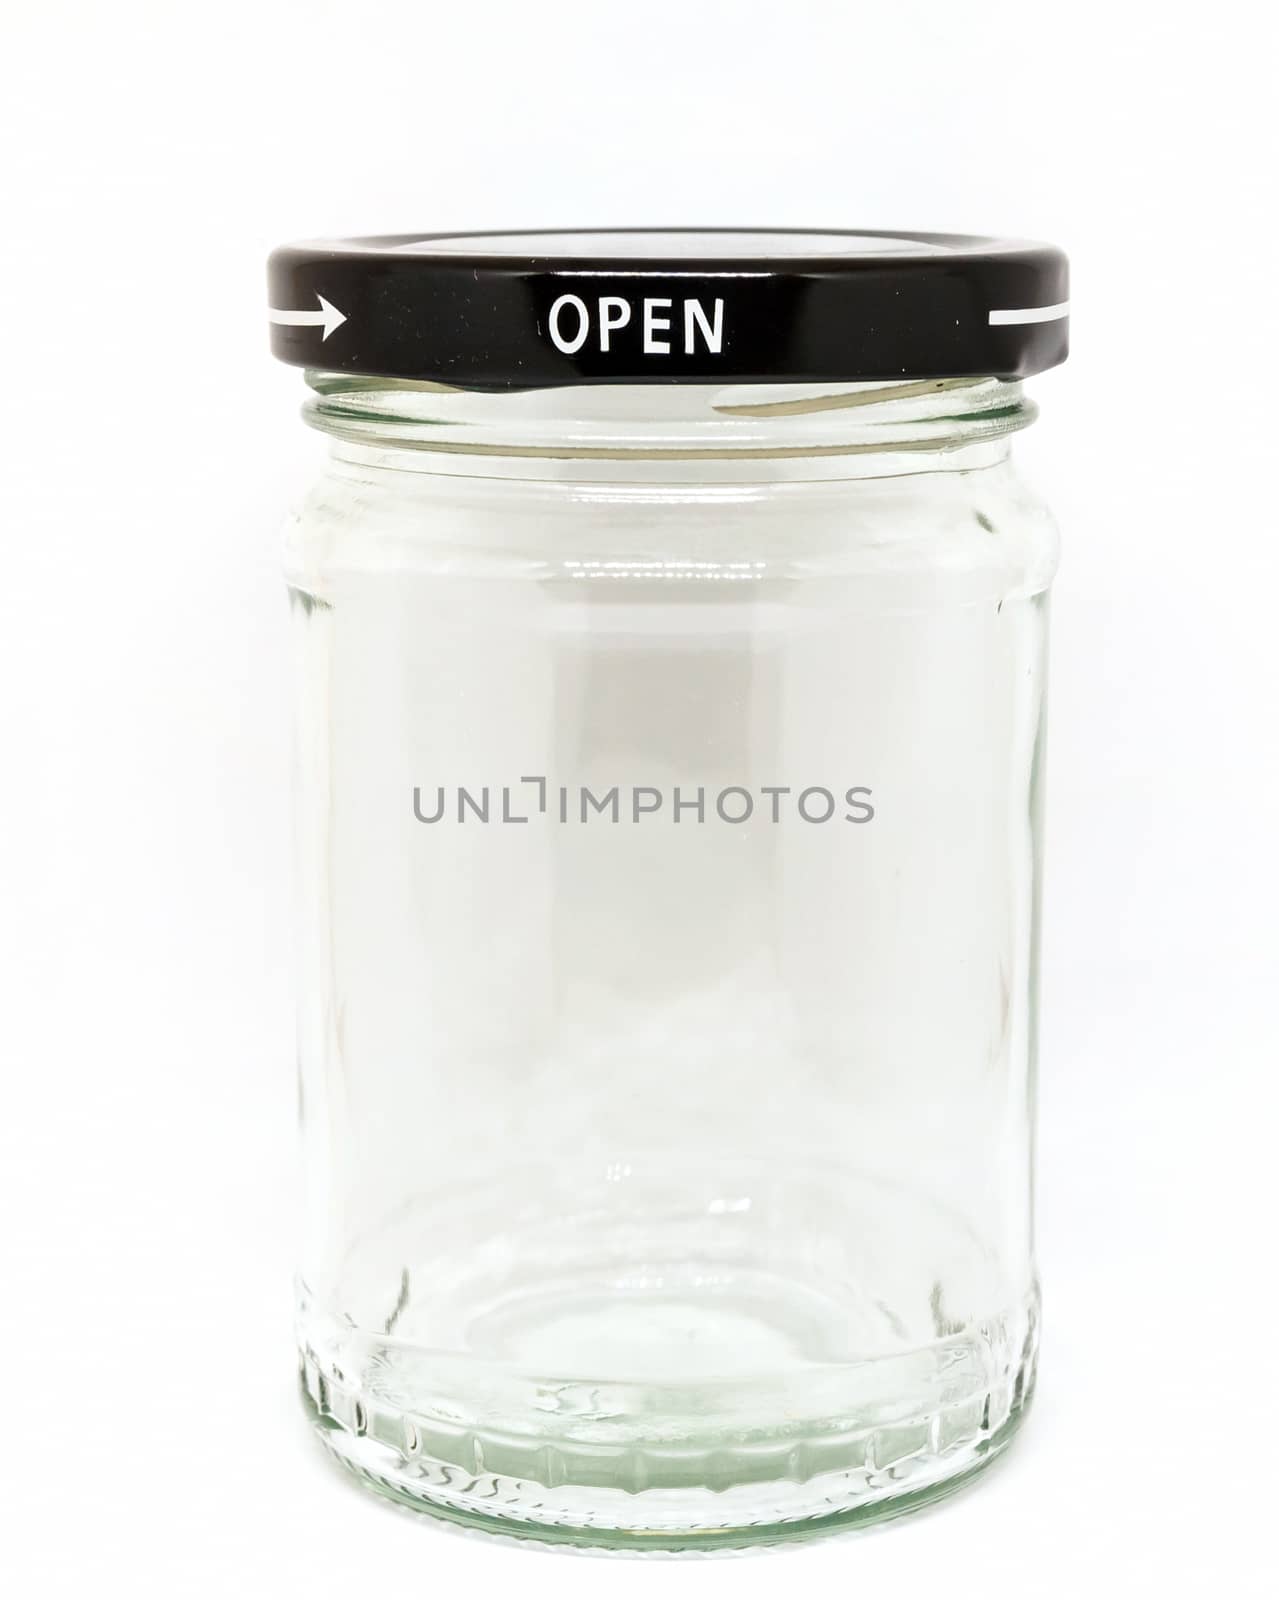 Glass jar with open sign.On white background.